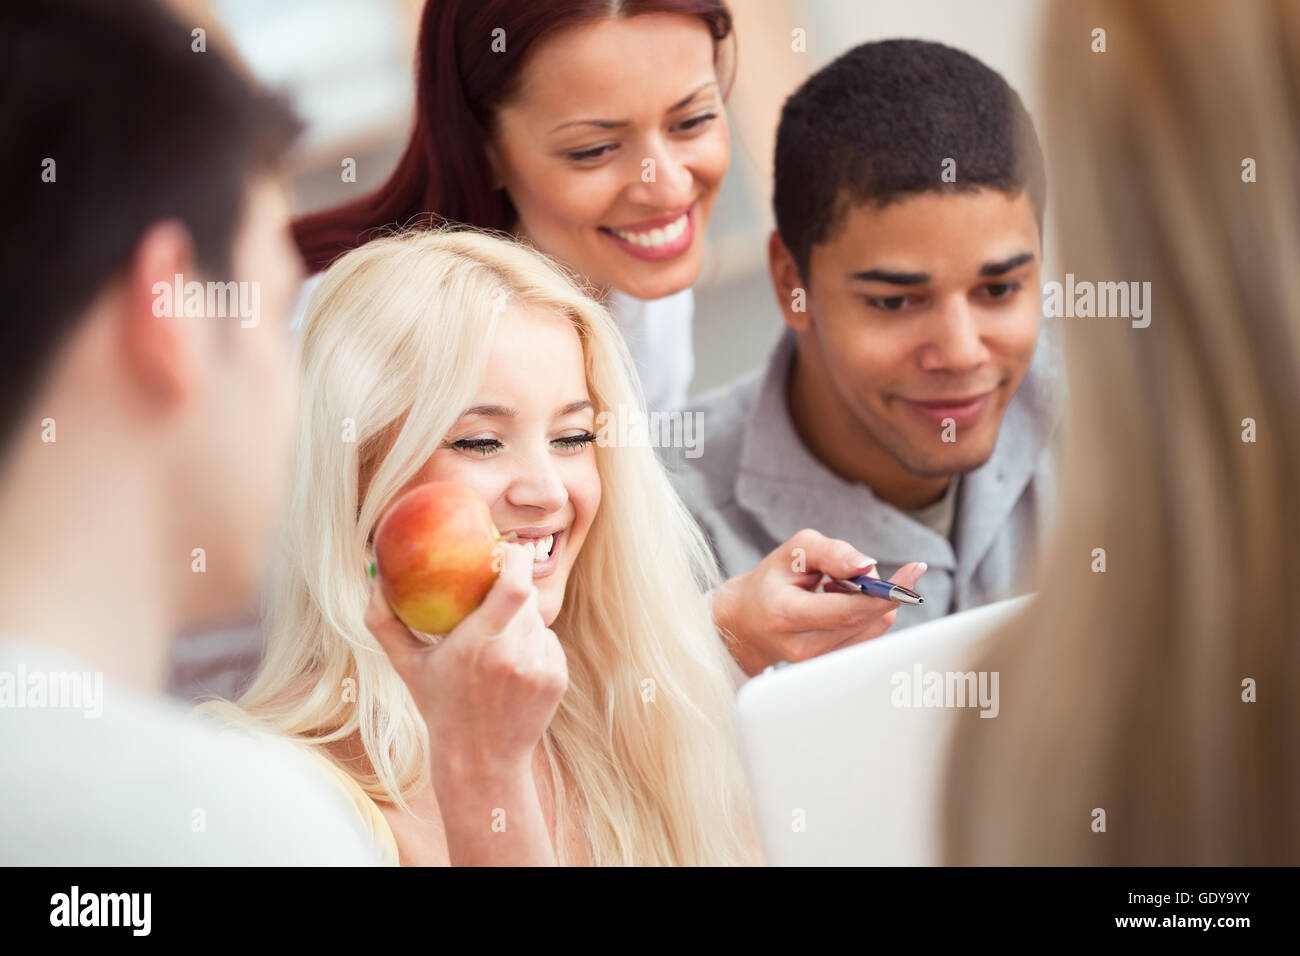 Teacher working with students. Stock Photo